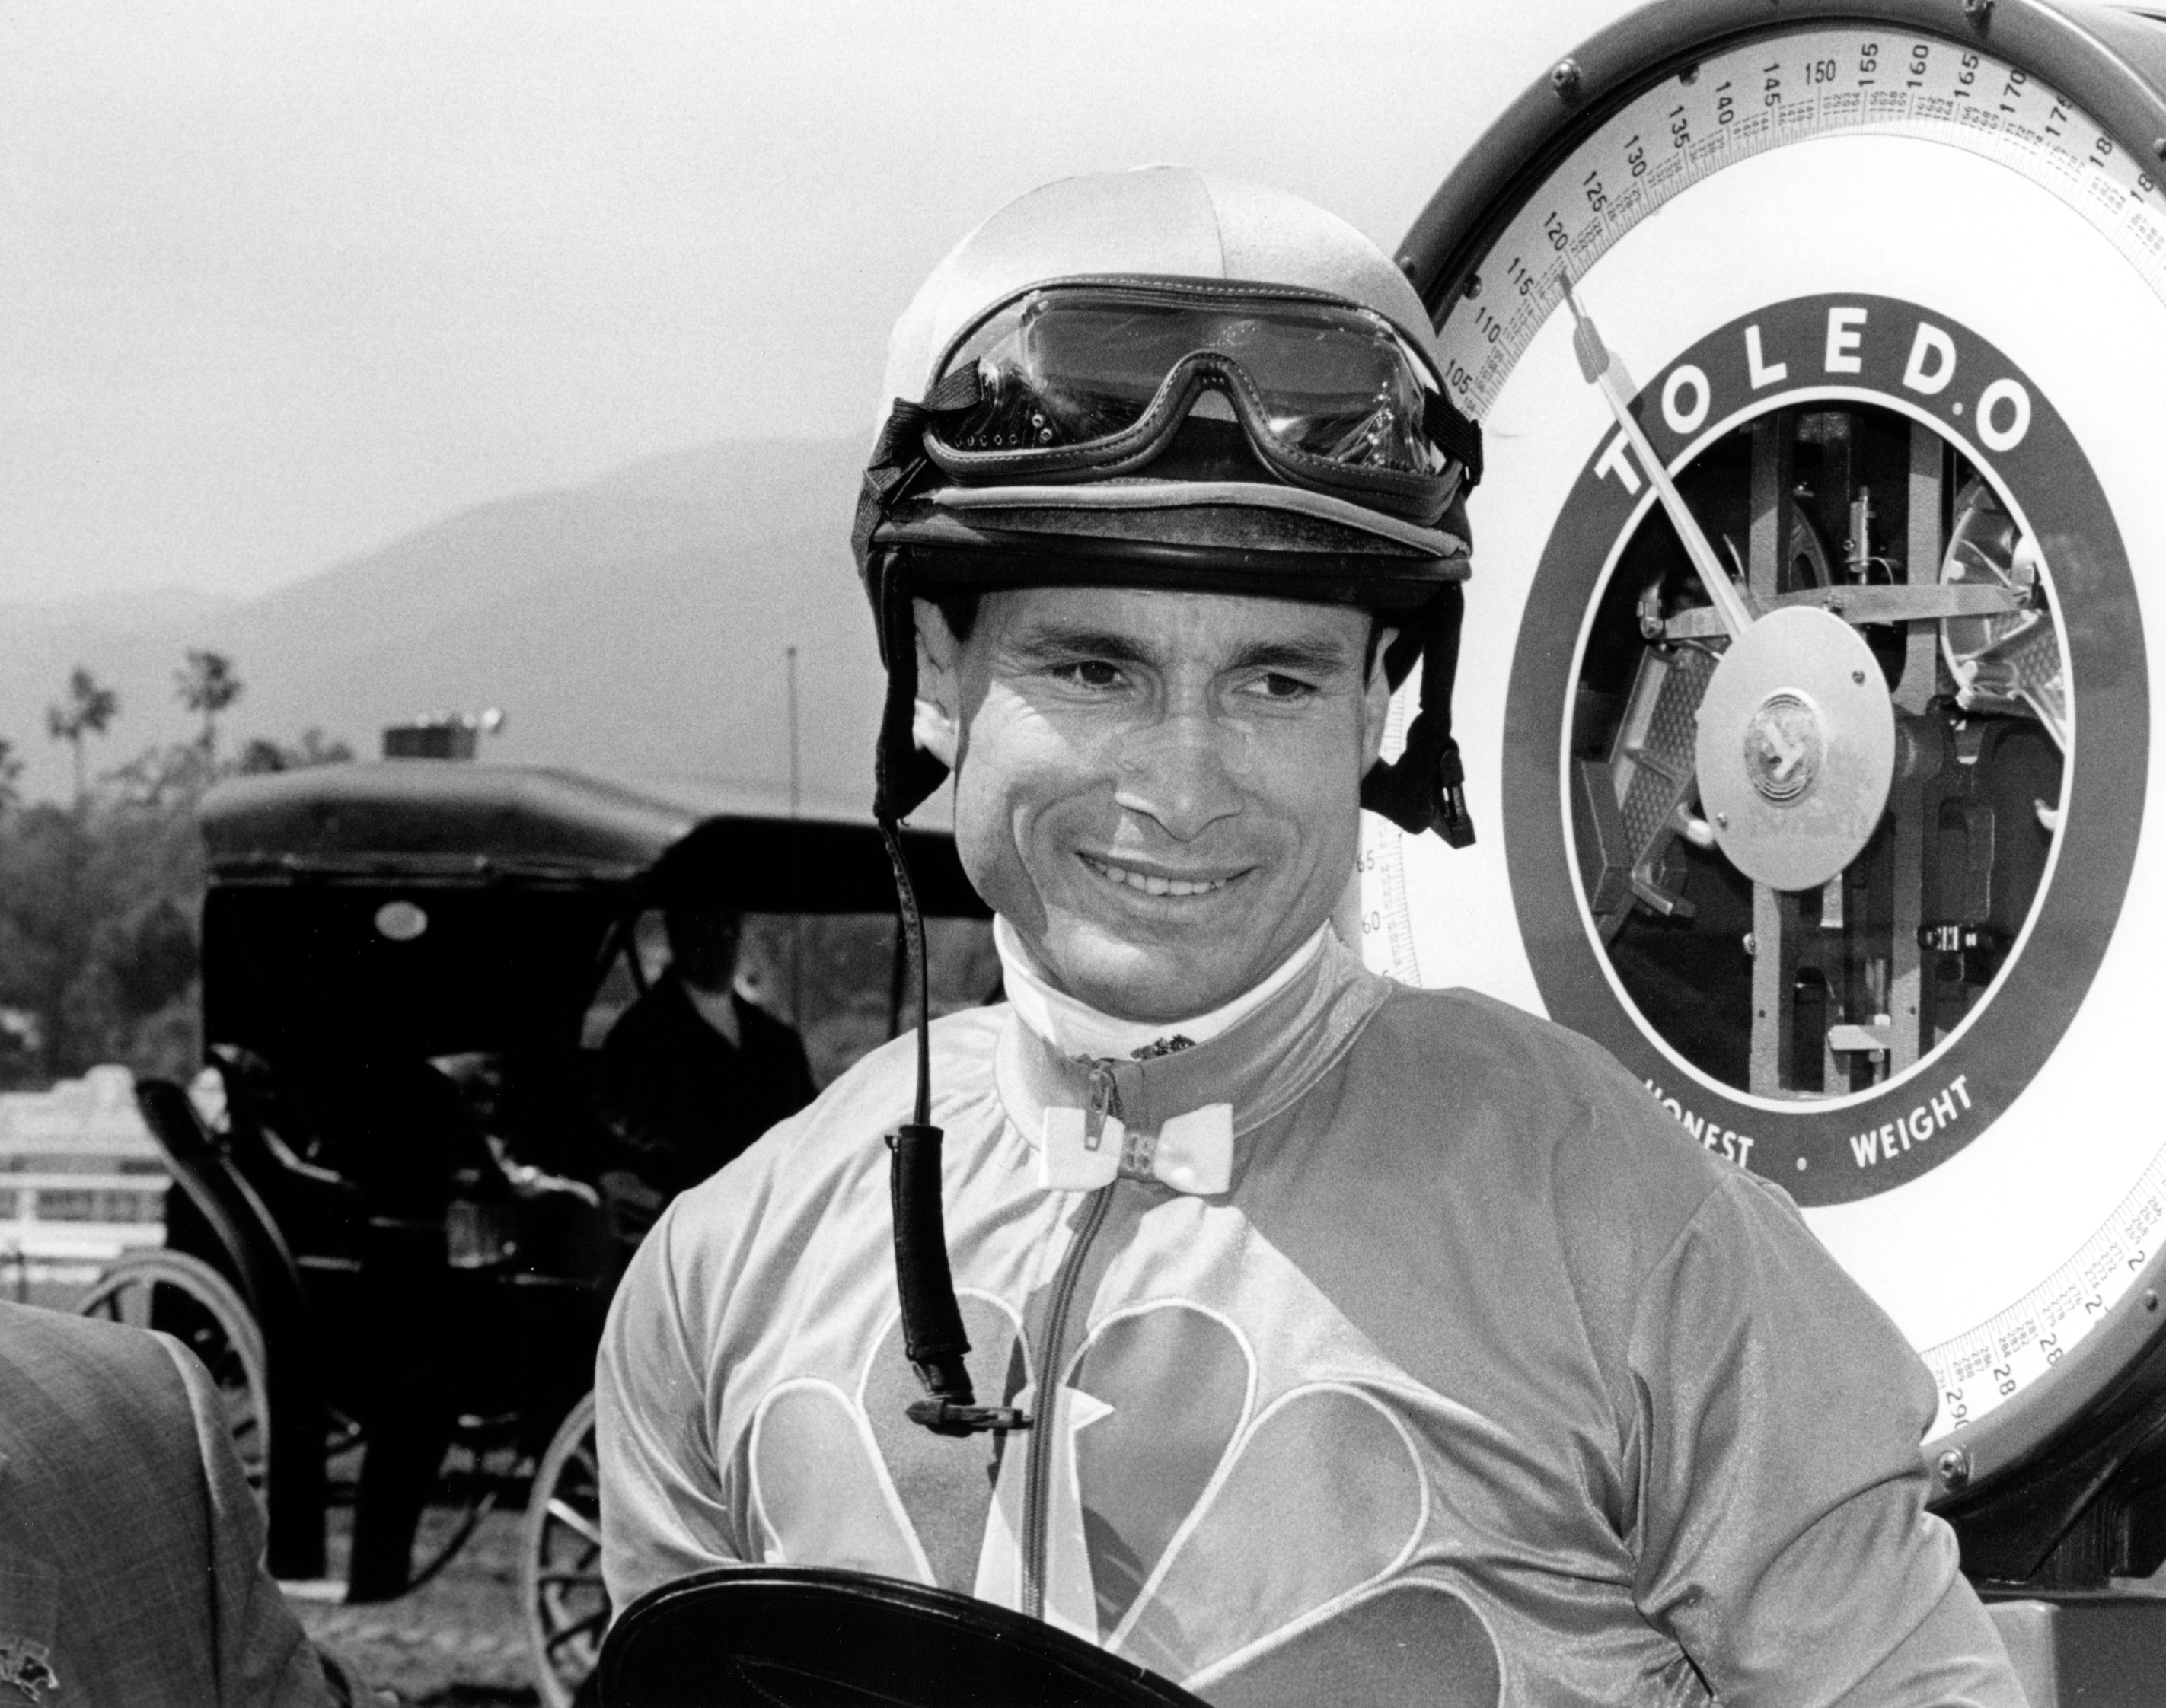 Alex Solis weighing in after winning the 2006 Santa Anita Derby (Bill Mochon/Museum Collection)